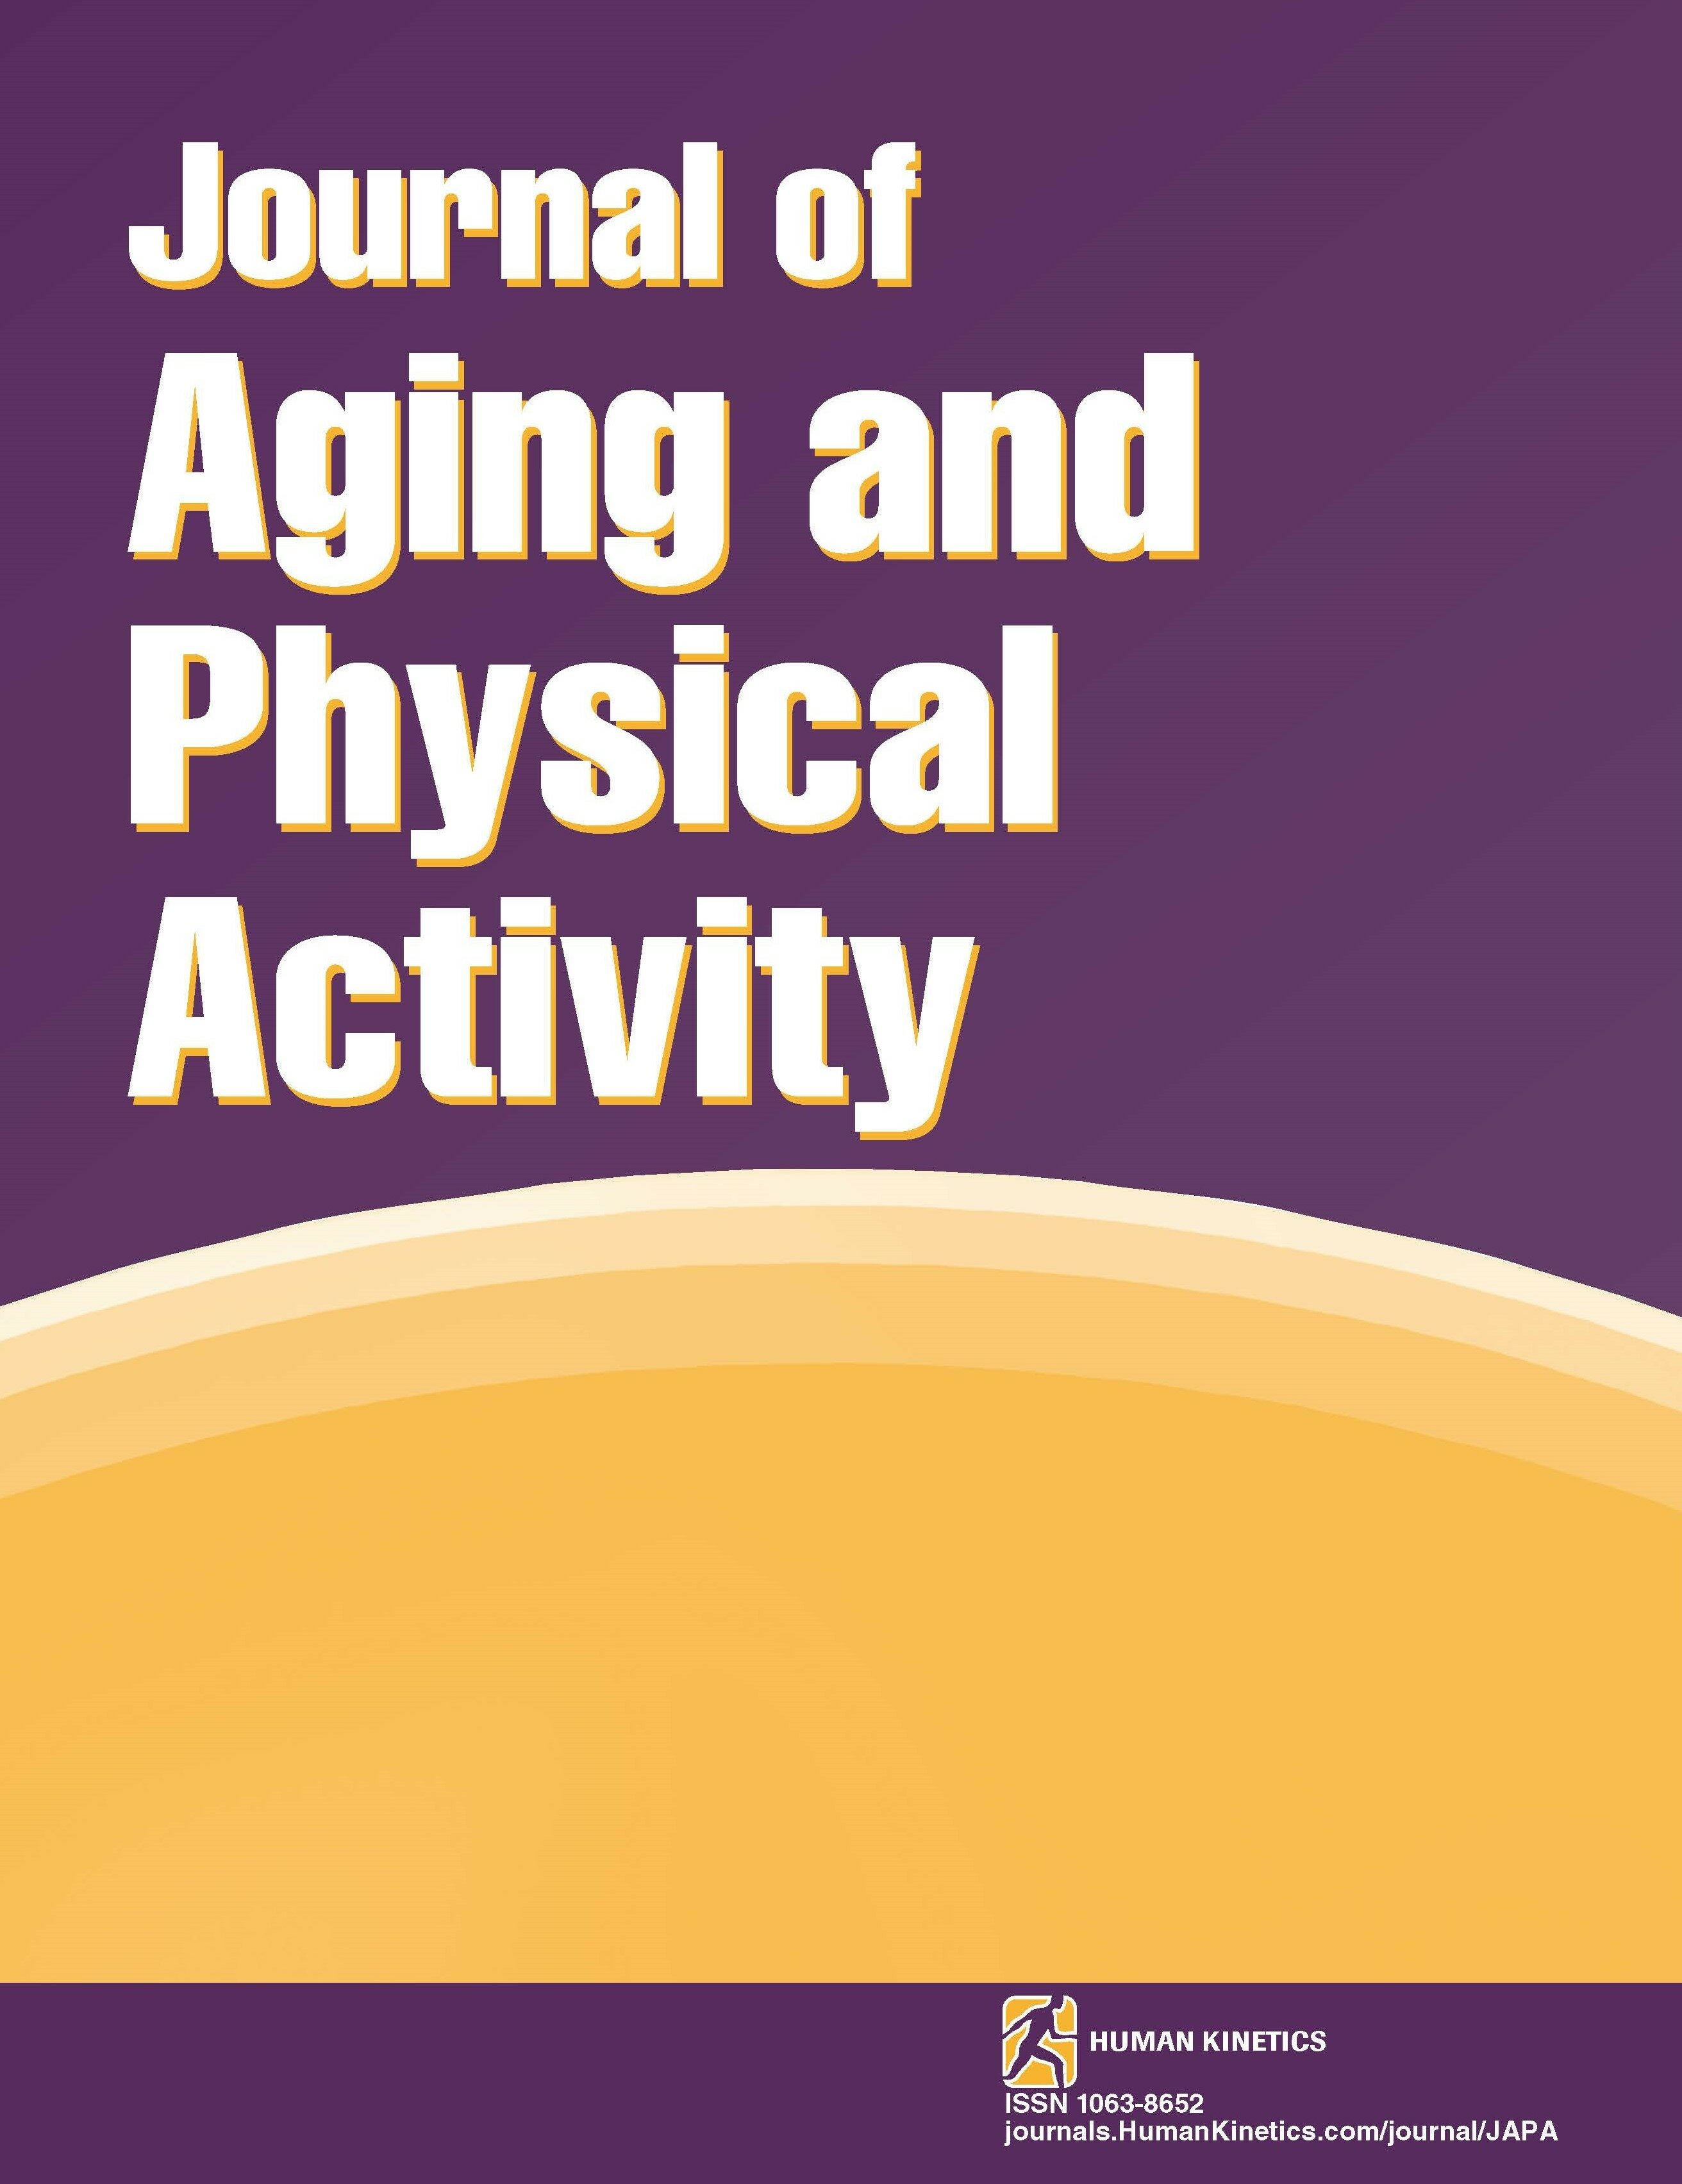 Breaking-Up Sedentary Behavior and Detraining Effects on Glycemic Control: A Randomized Crossover Trial in Trained Older Adults